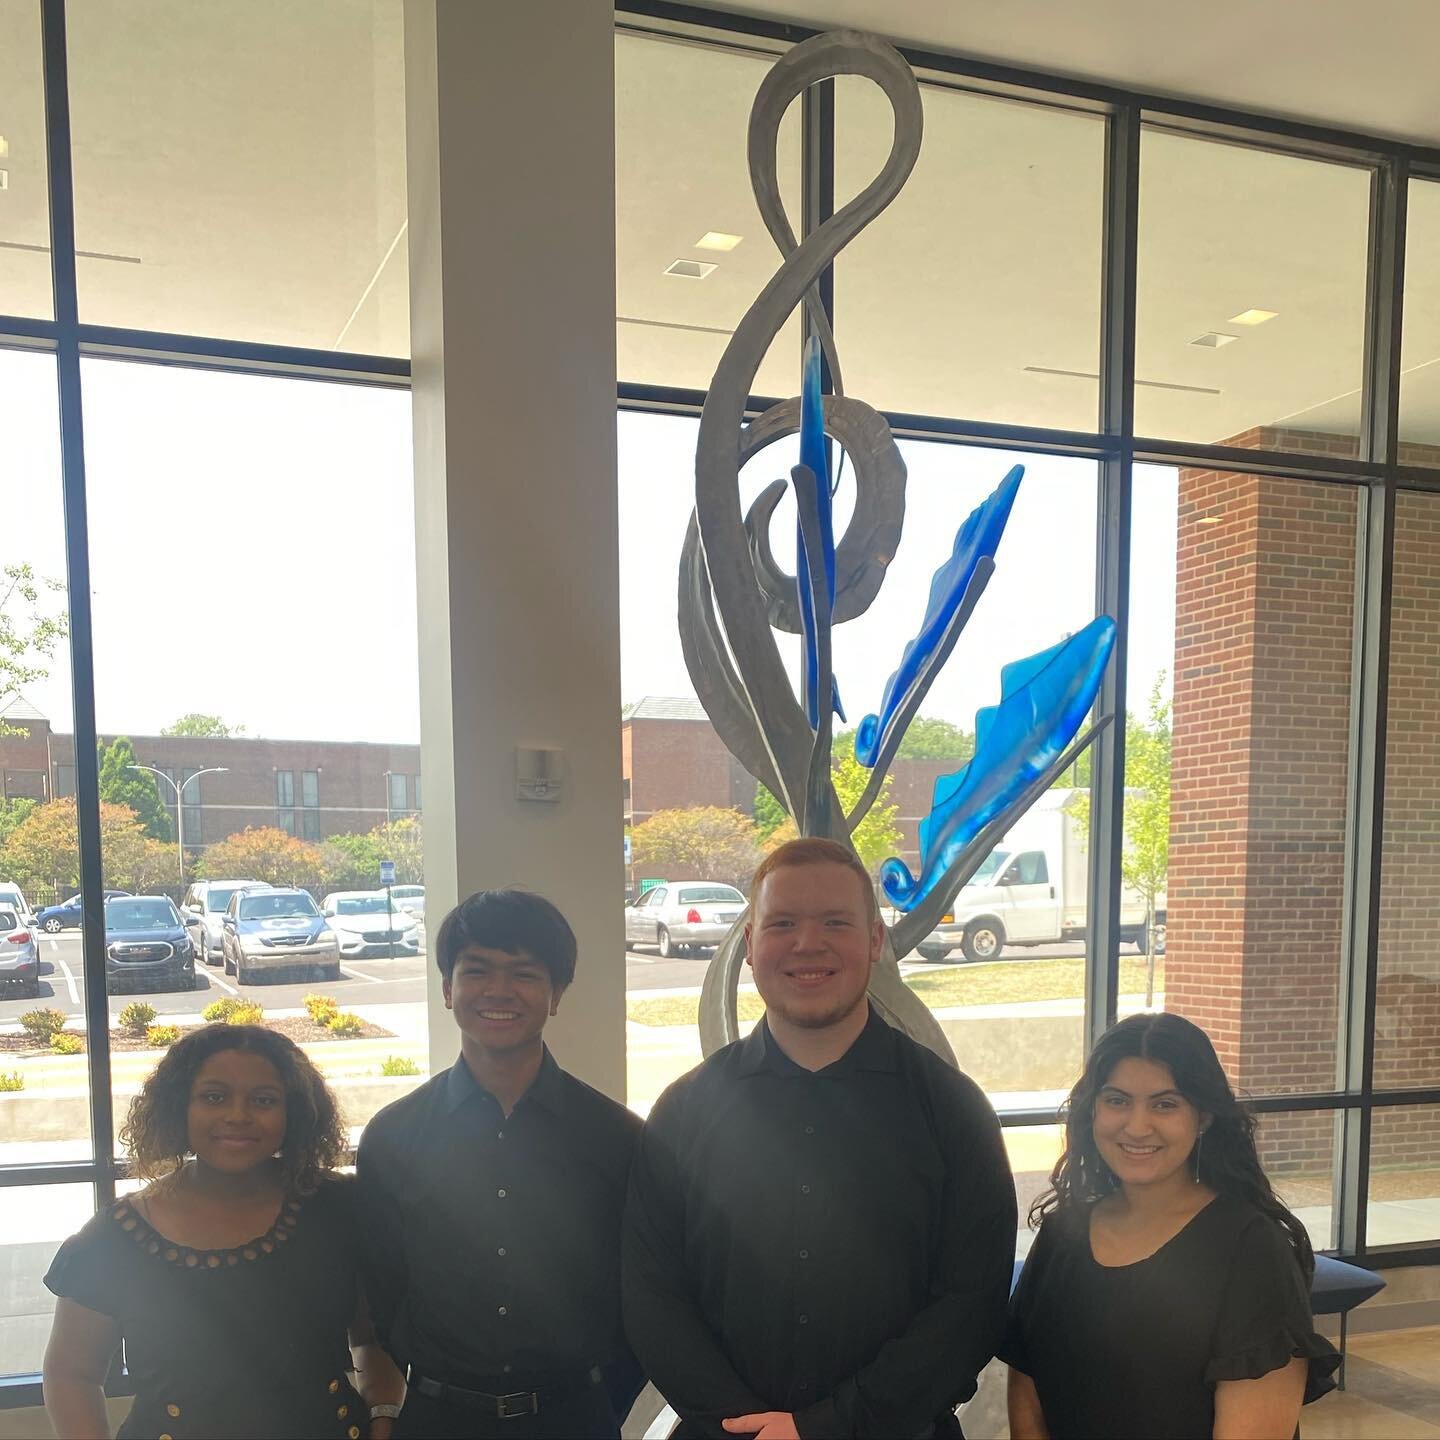 Today was quite the marathon! We had MYSP students usher for the @memphissymphonyorchestra concert. The October String Quartet performed in the lobby prior to the MSO concert. The Prelude Strings ensemble got to work with high school string students 